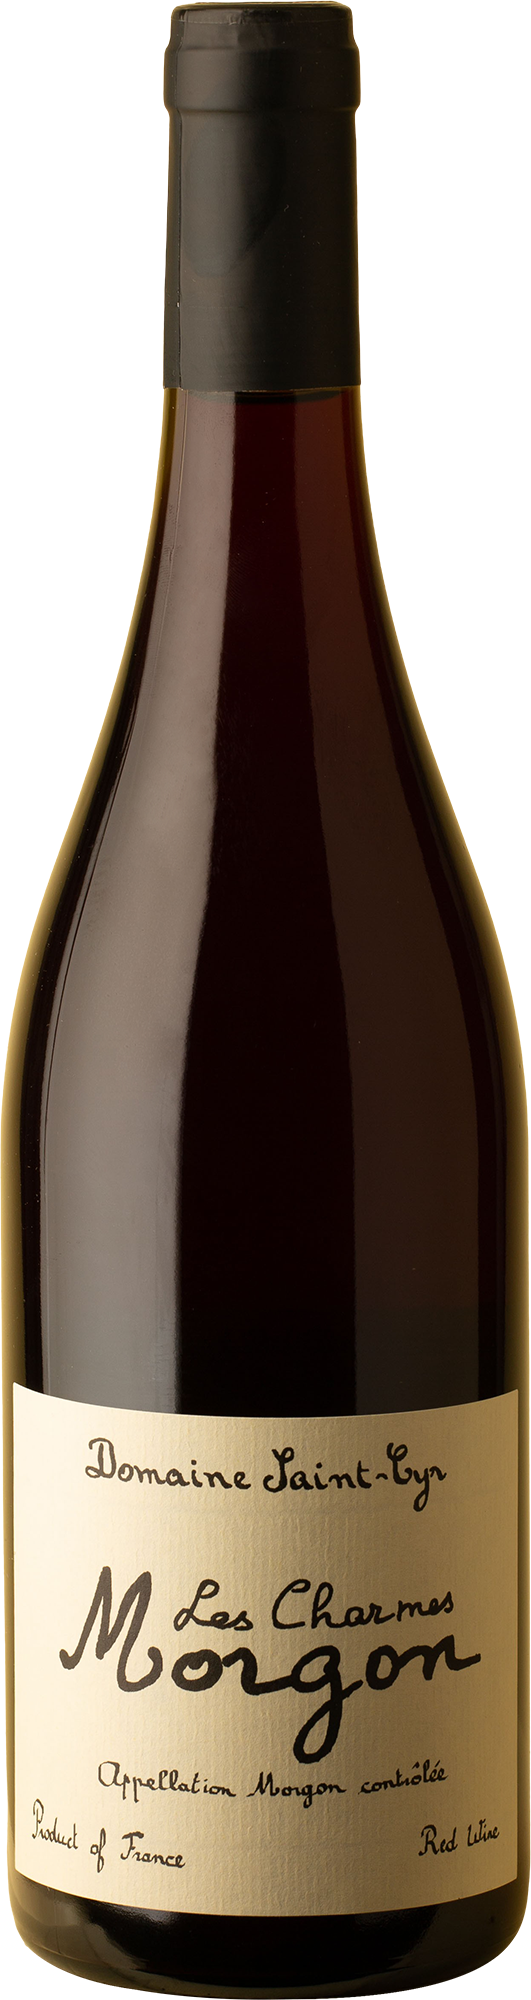 Domaine Saint-Cyr - Morgon Les Charmes Gamay 2020 Red Wine